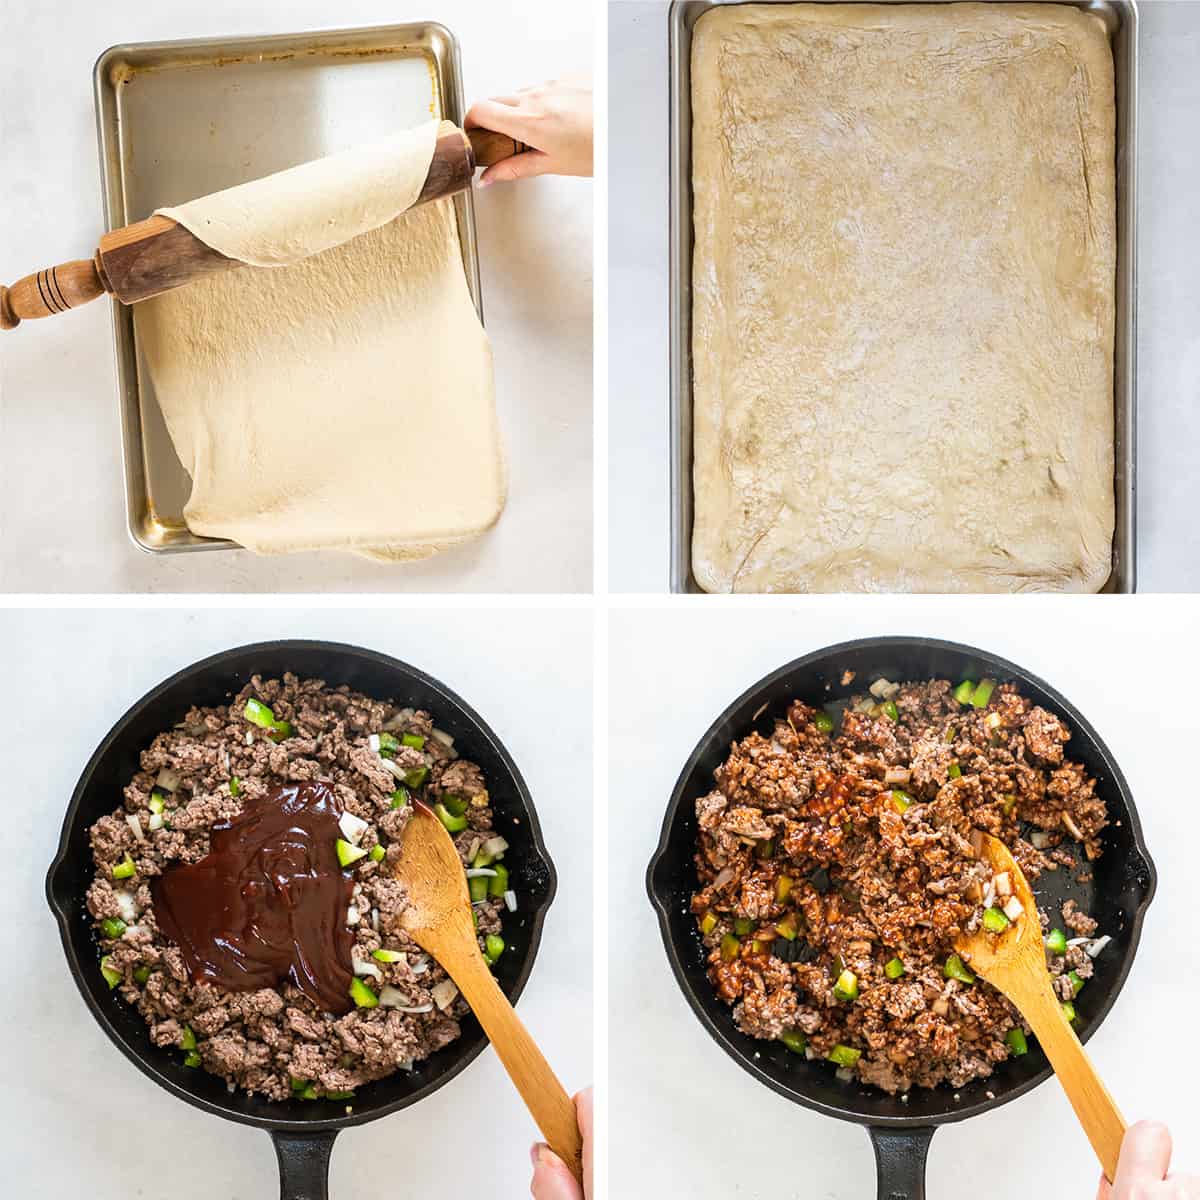 A rolling pin sets pizza dough on a baking sheet and a ground beef mixture is cooked in a cast iron skillet.